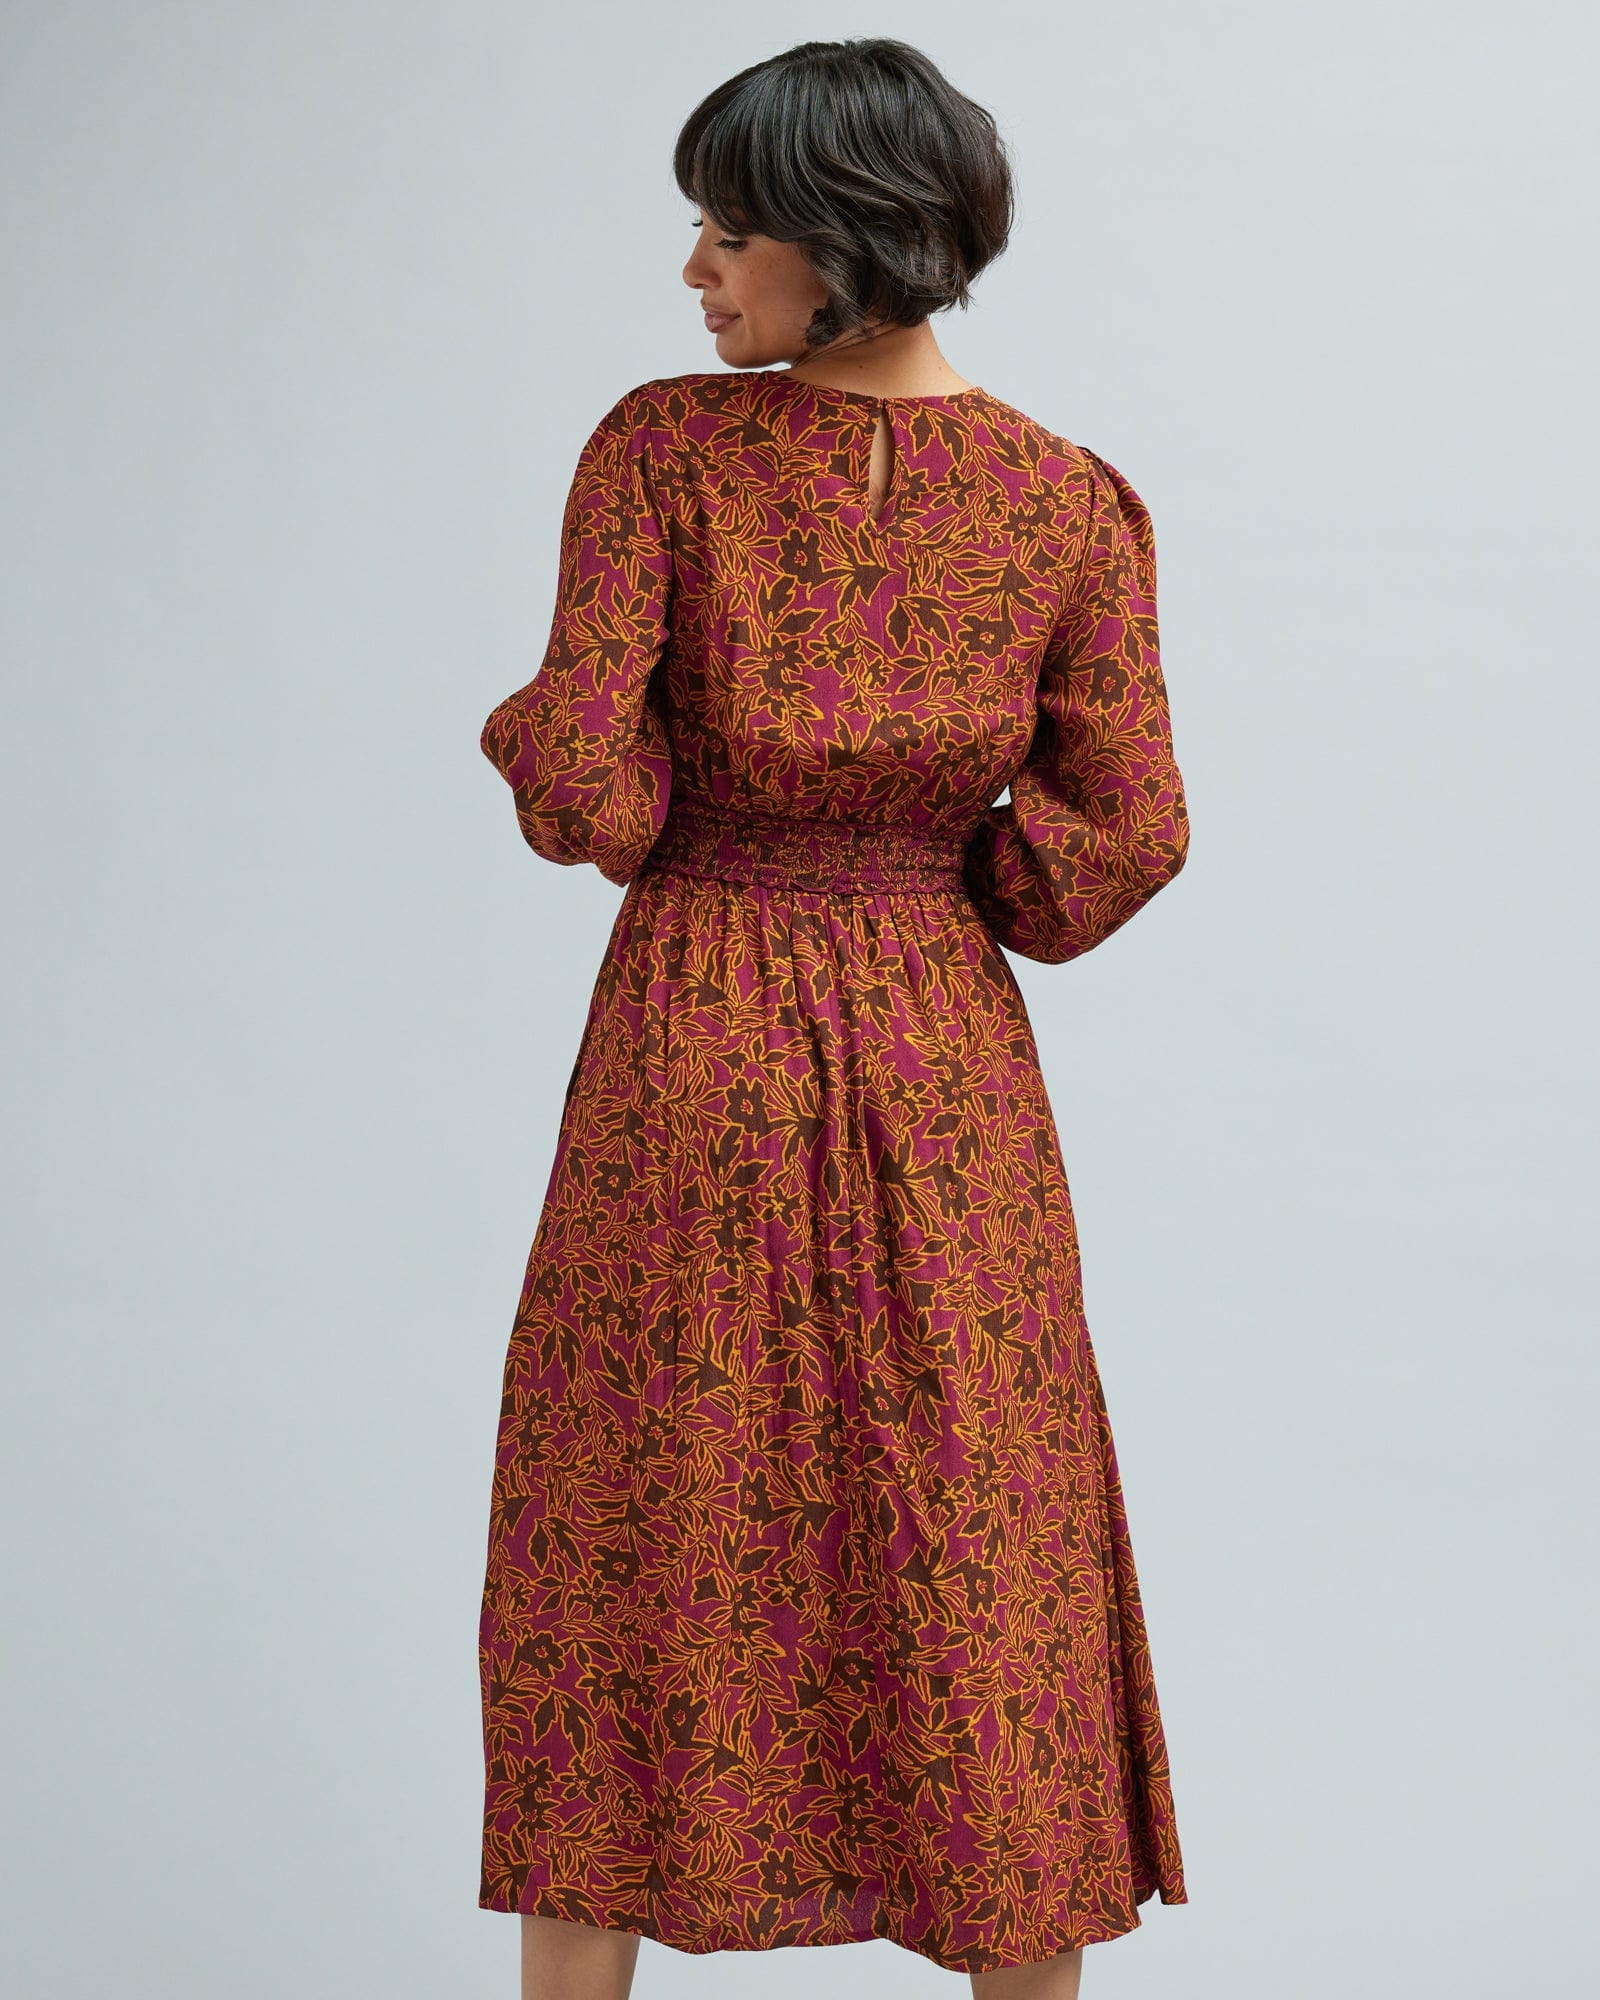 Woman in a long sleeve, brown and orange floral print dress